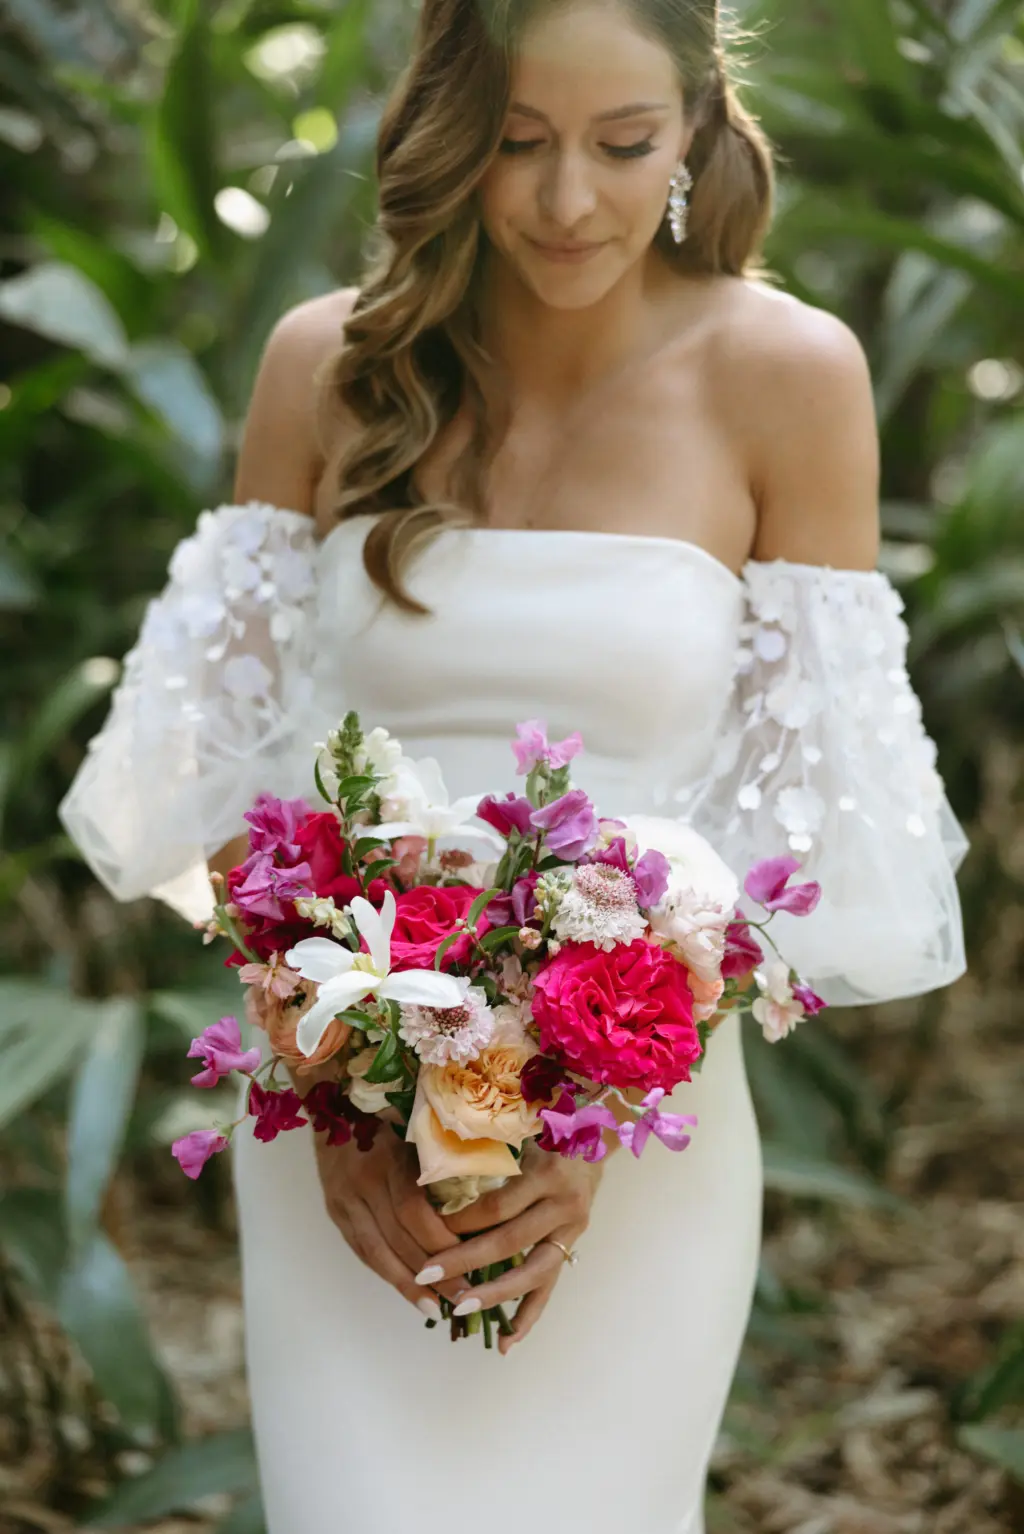 Removable Off-The-Shoulder Puff Sleeves for White Timeless Simple Strapless Fit and Flare Alexandra Grecco Wedding Dress Ideas | Pink and Blush Garden Roses, Pink Bougainvillea, Bridal Garden Bouquet Inspiration | Tampa Planner Wilder Mind Events | Hair and Makeup Artists Femme Akoi Beauty Studio